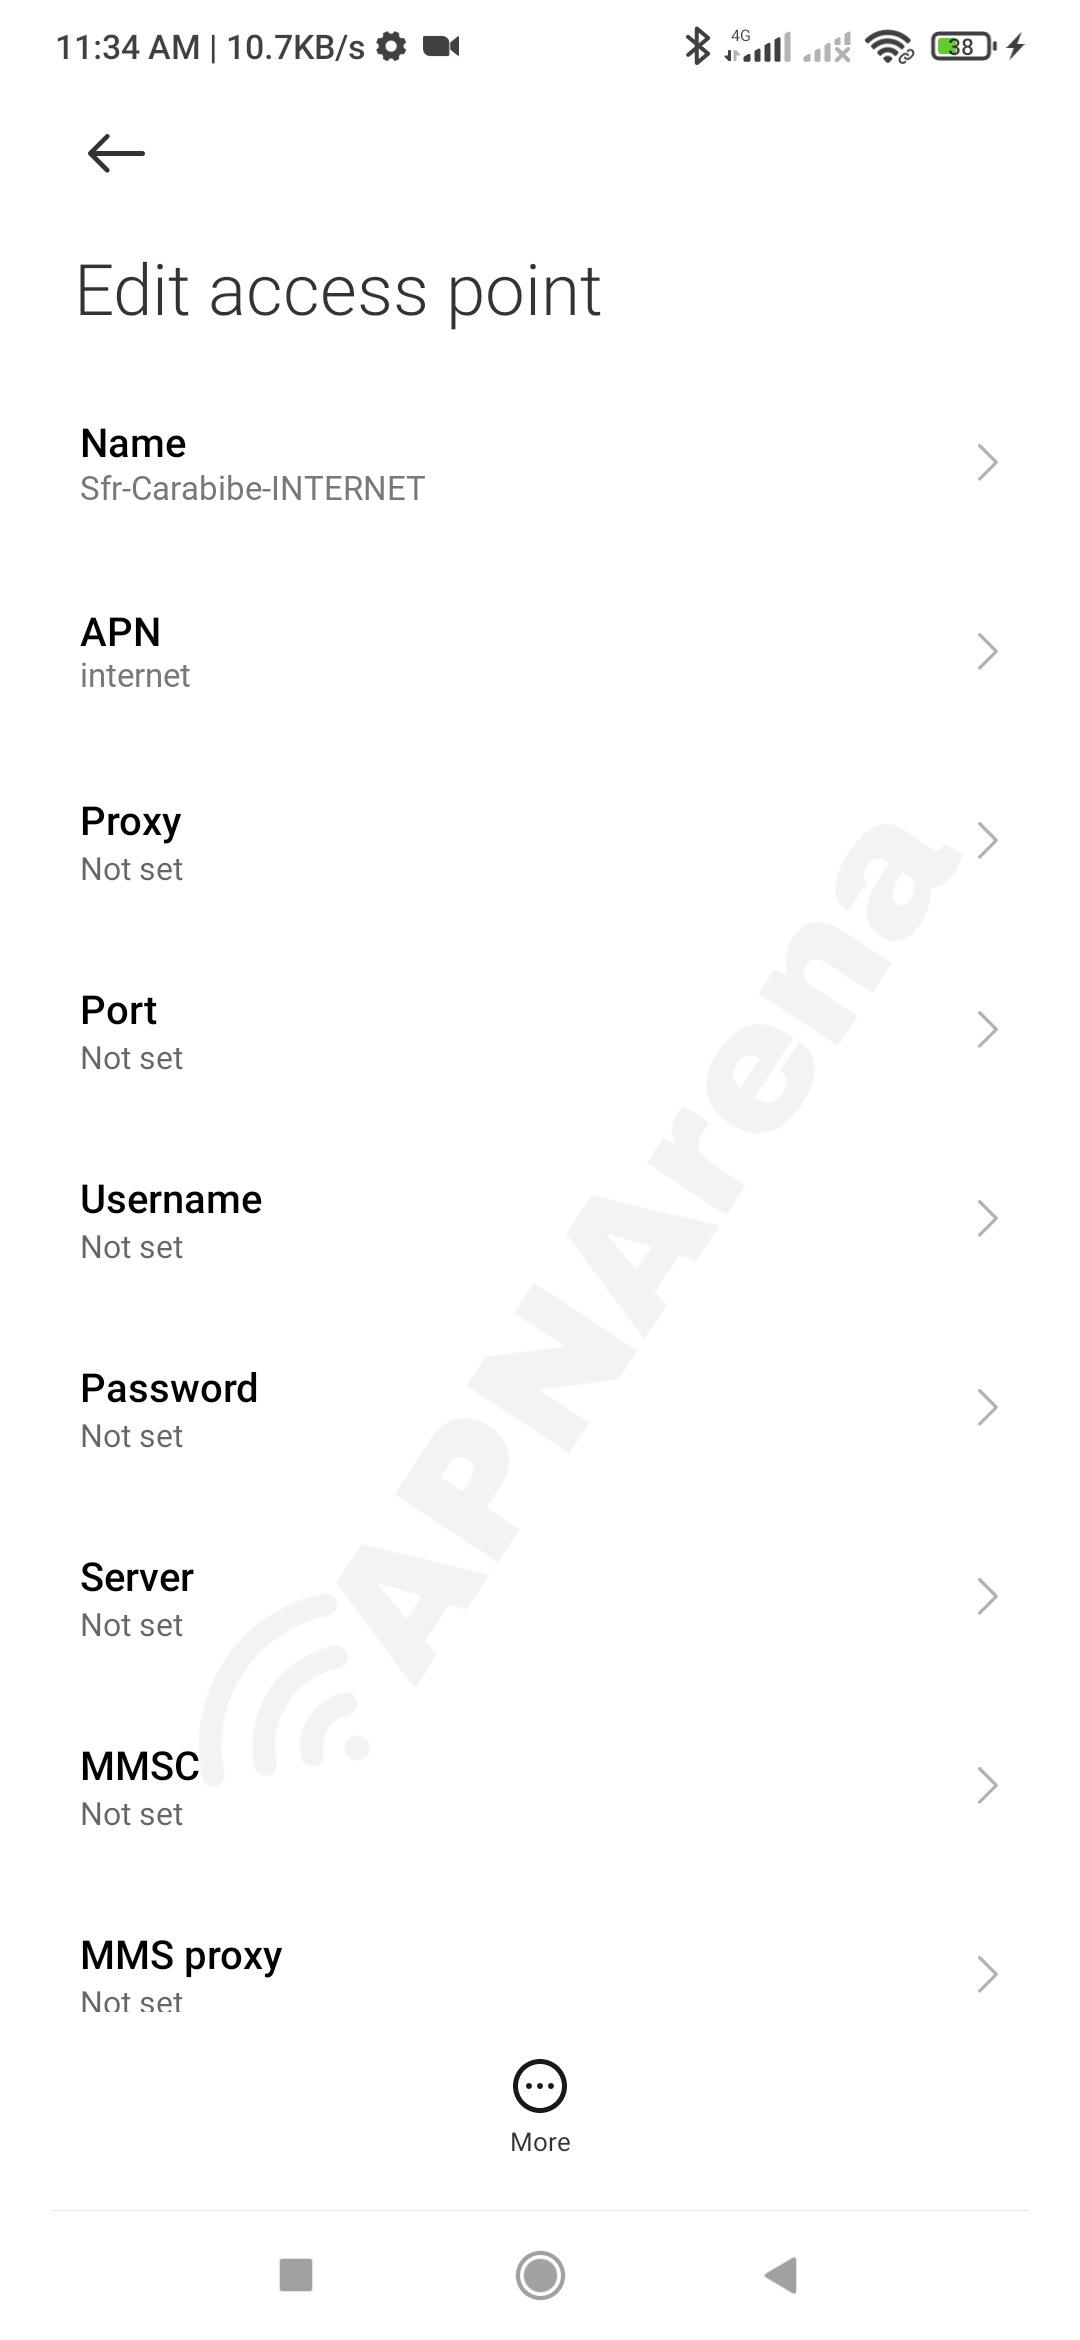 SFR Caraïbe APN Settings for Android